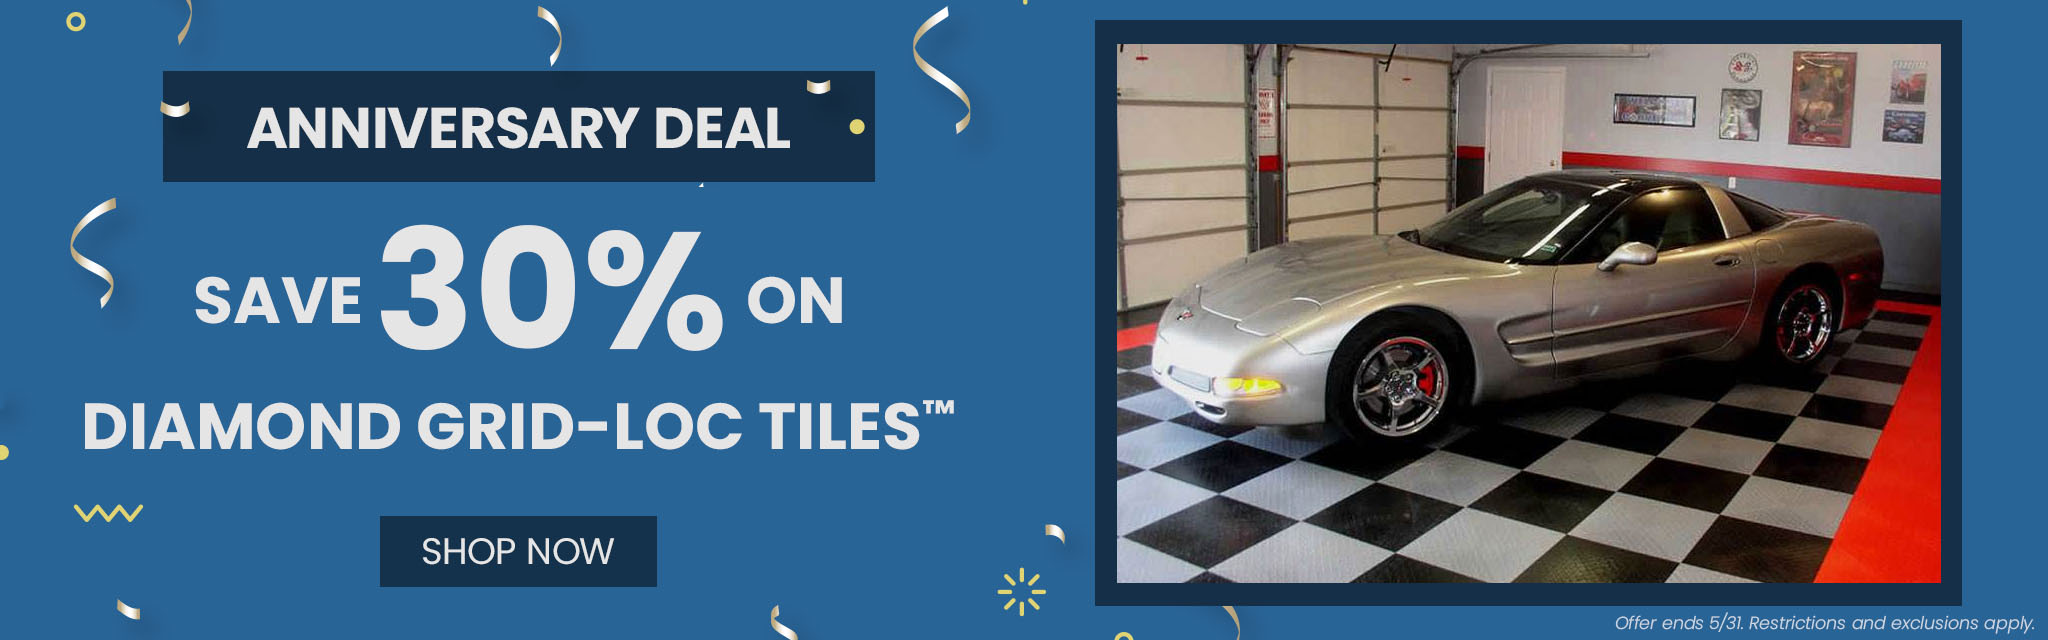 Anniversary Deal | Save 30%* On Diamond Grid-Loc Tiles™  CTA: Shop Now Ends 5/31. Restrictions and exclusions apply. 